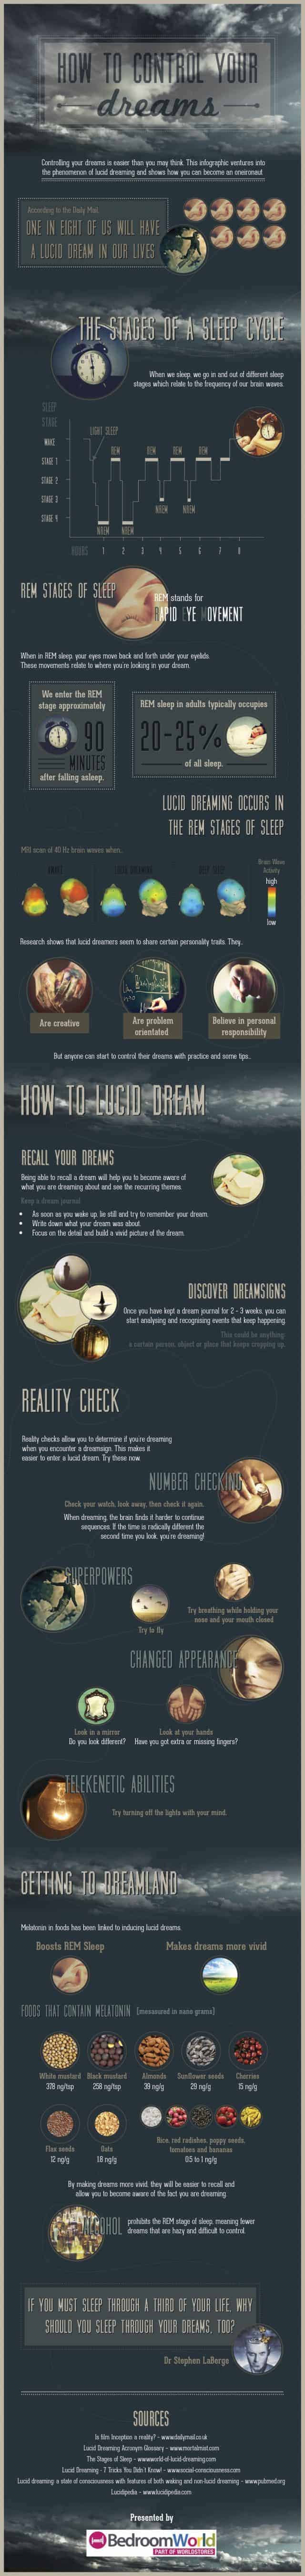 how_to_control_your_dreams